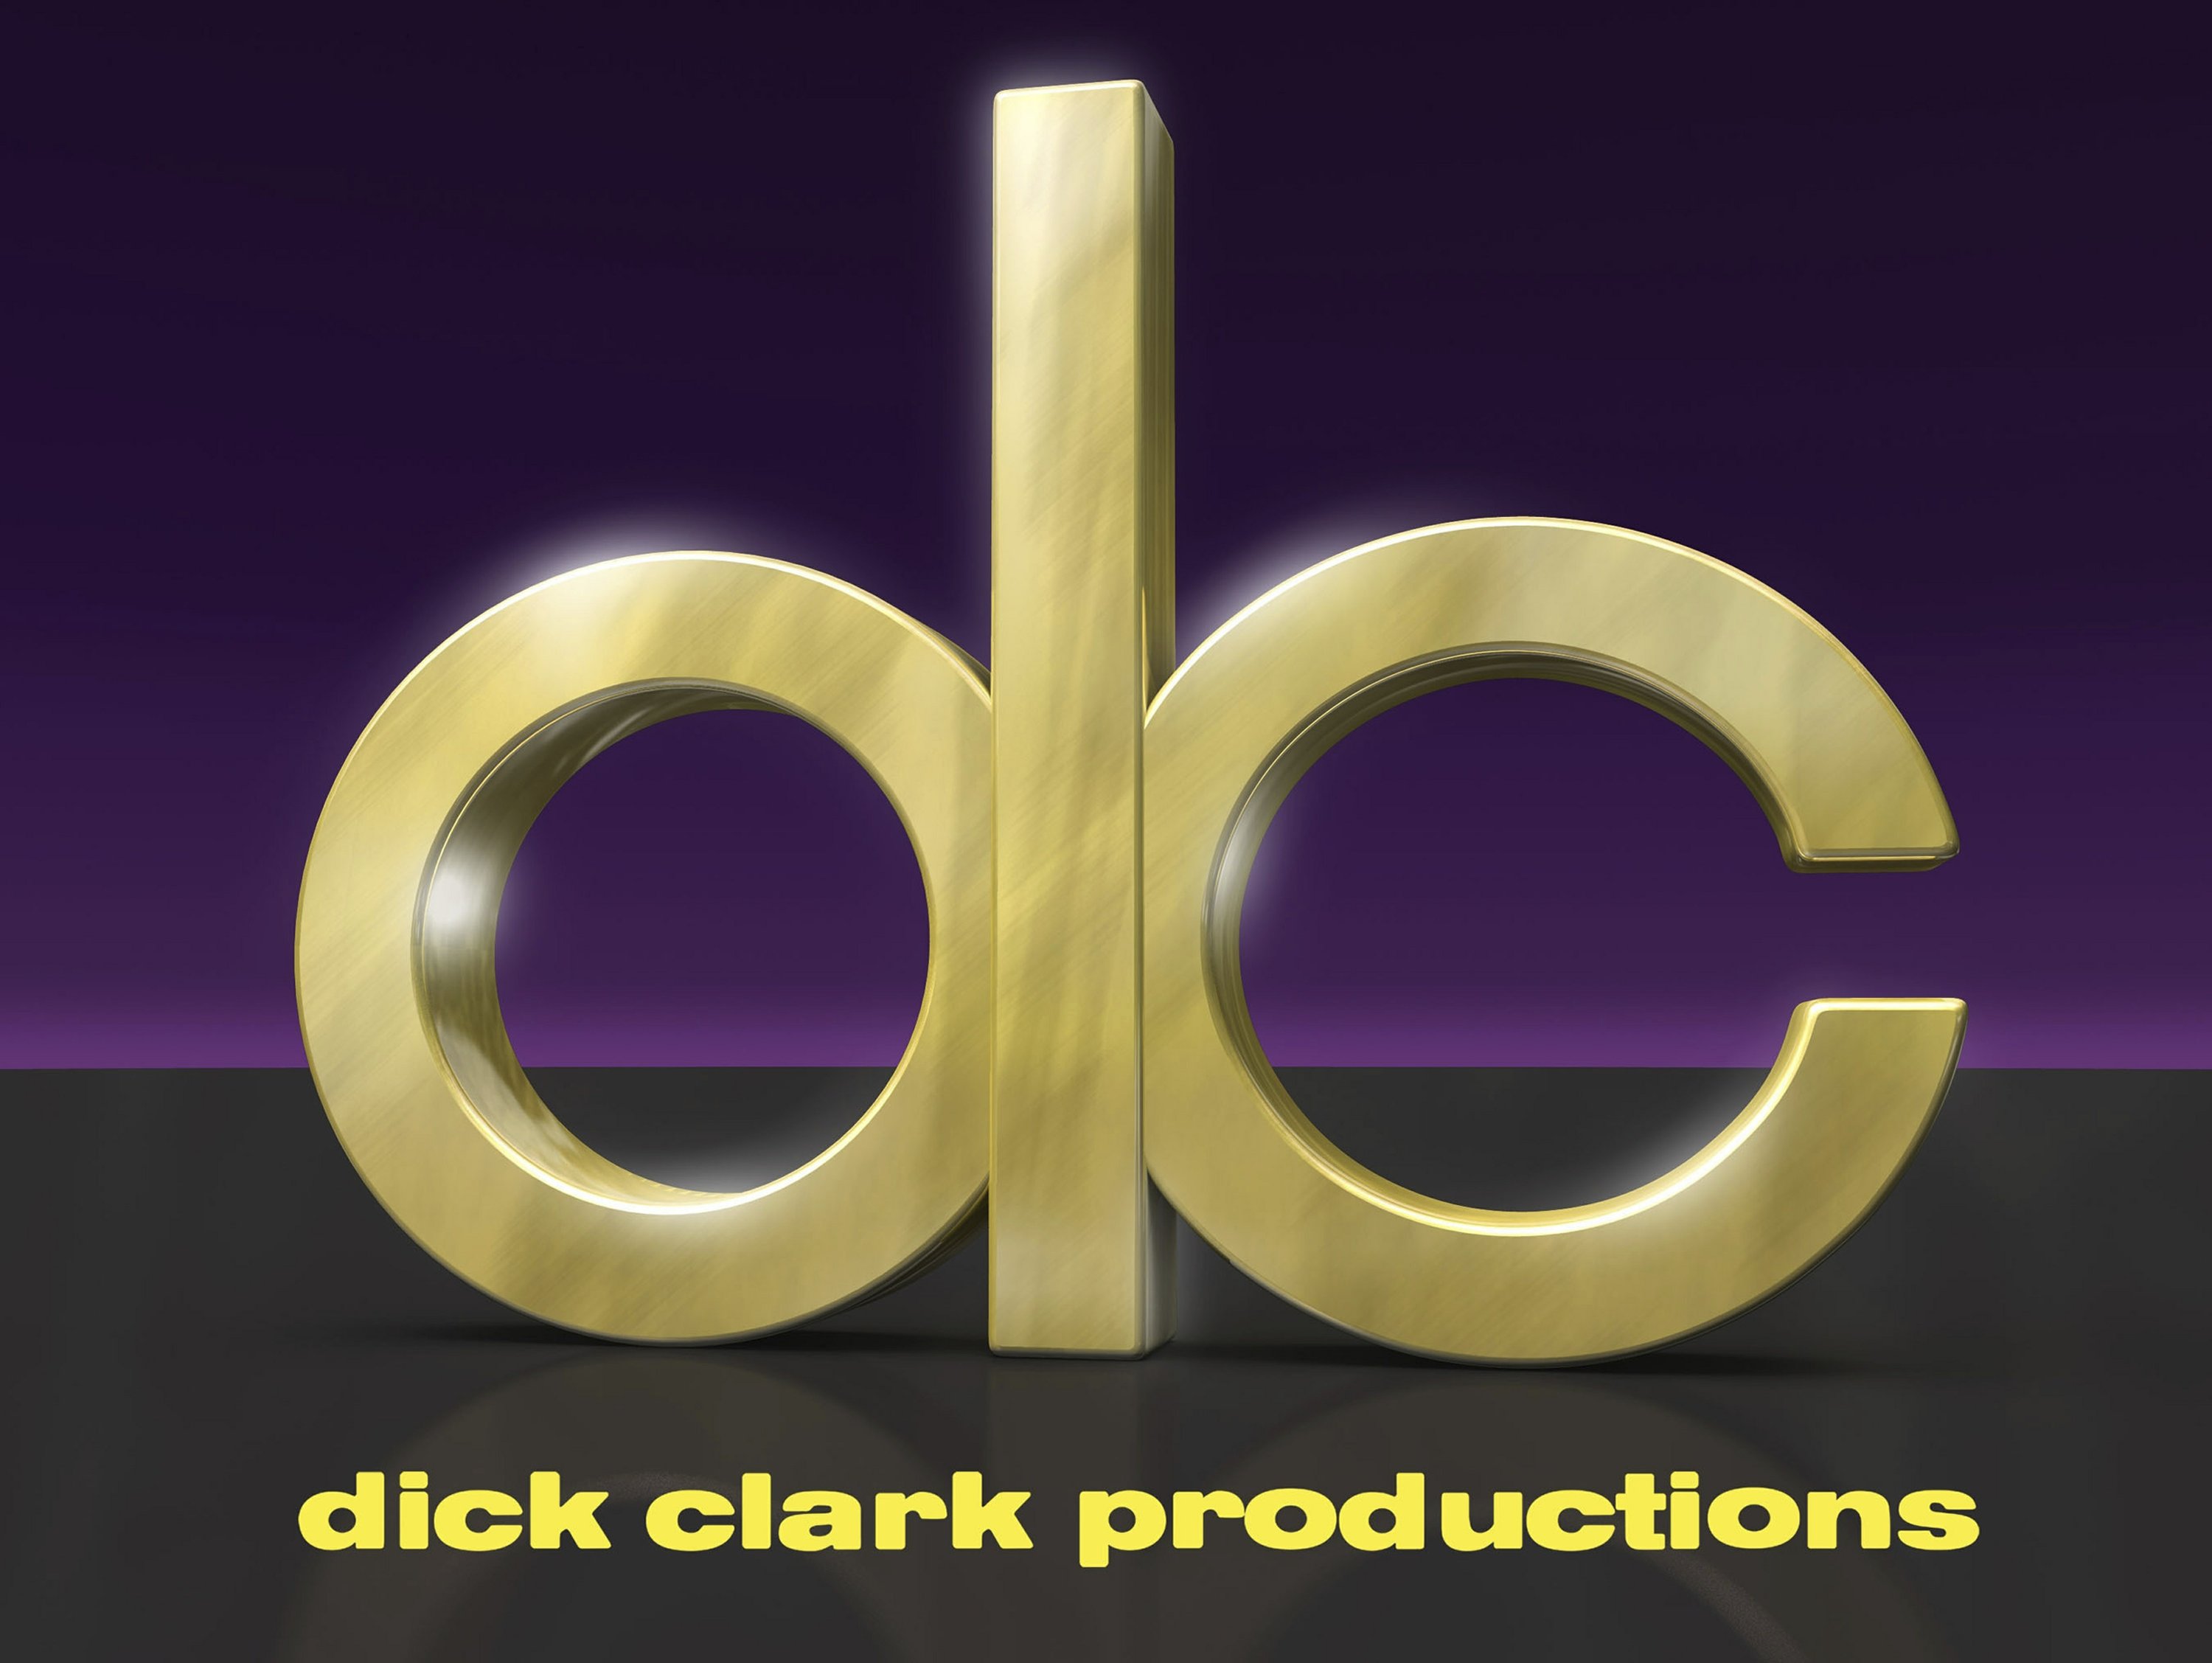 Dick clark productions television shows